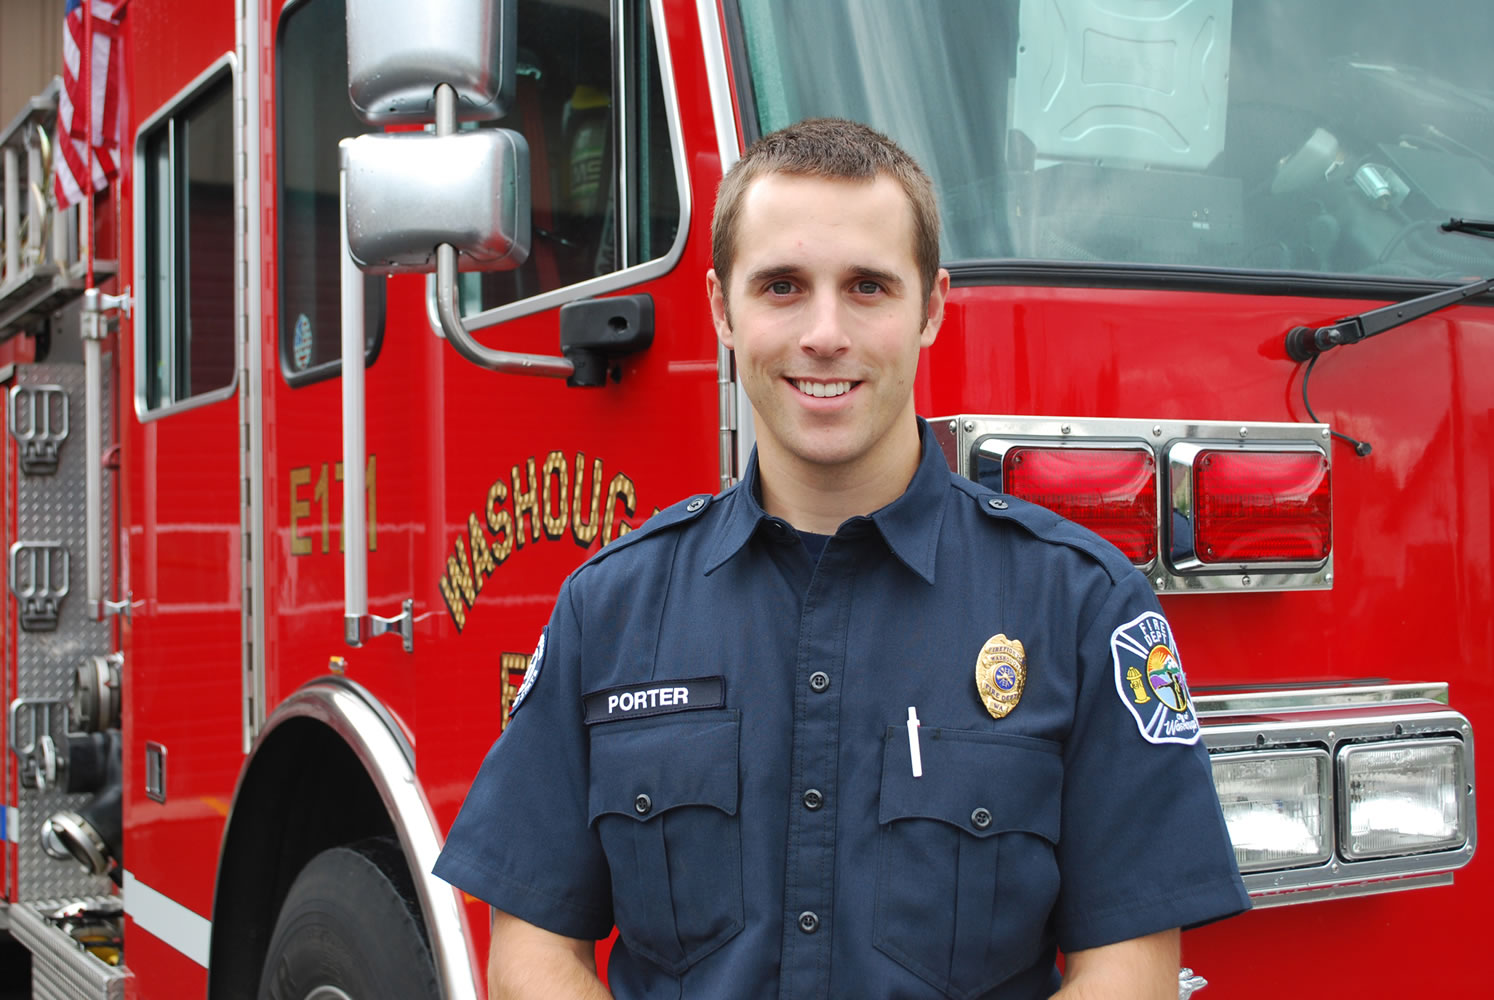 Camas-Washougal: While on a family vacation in Disneyland, Camas-Washougal firefighter/EMT Ben Porter saved a manis life.